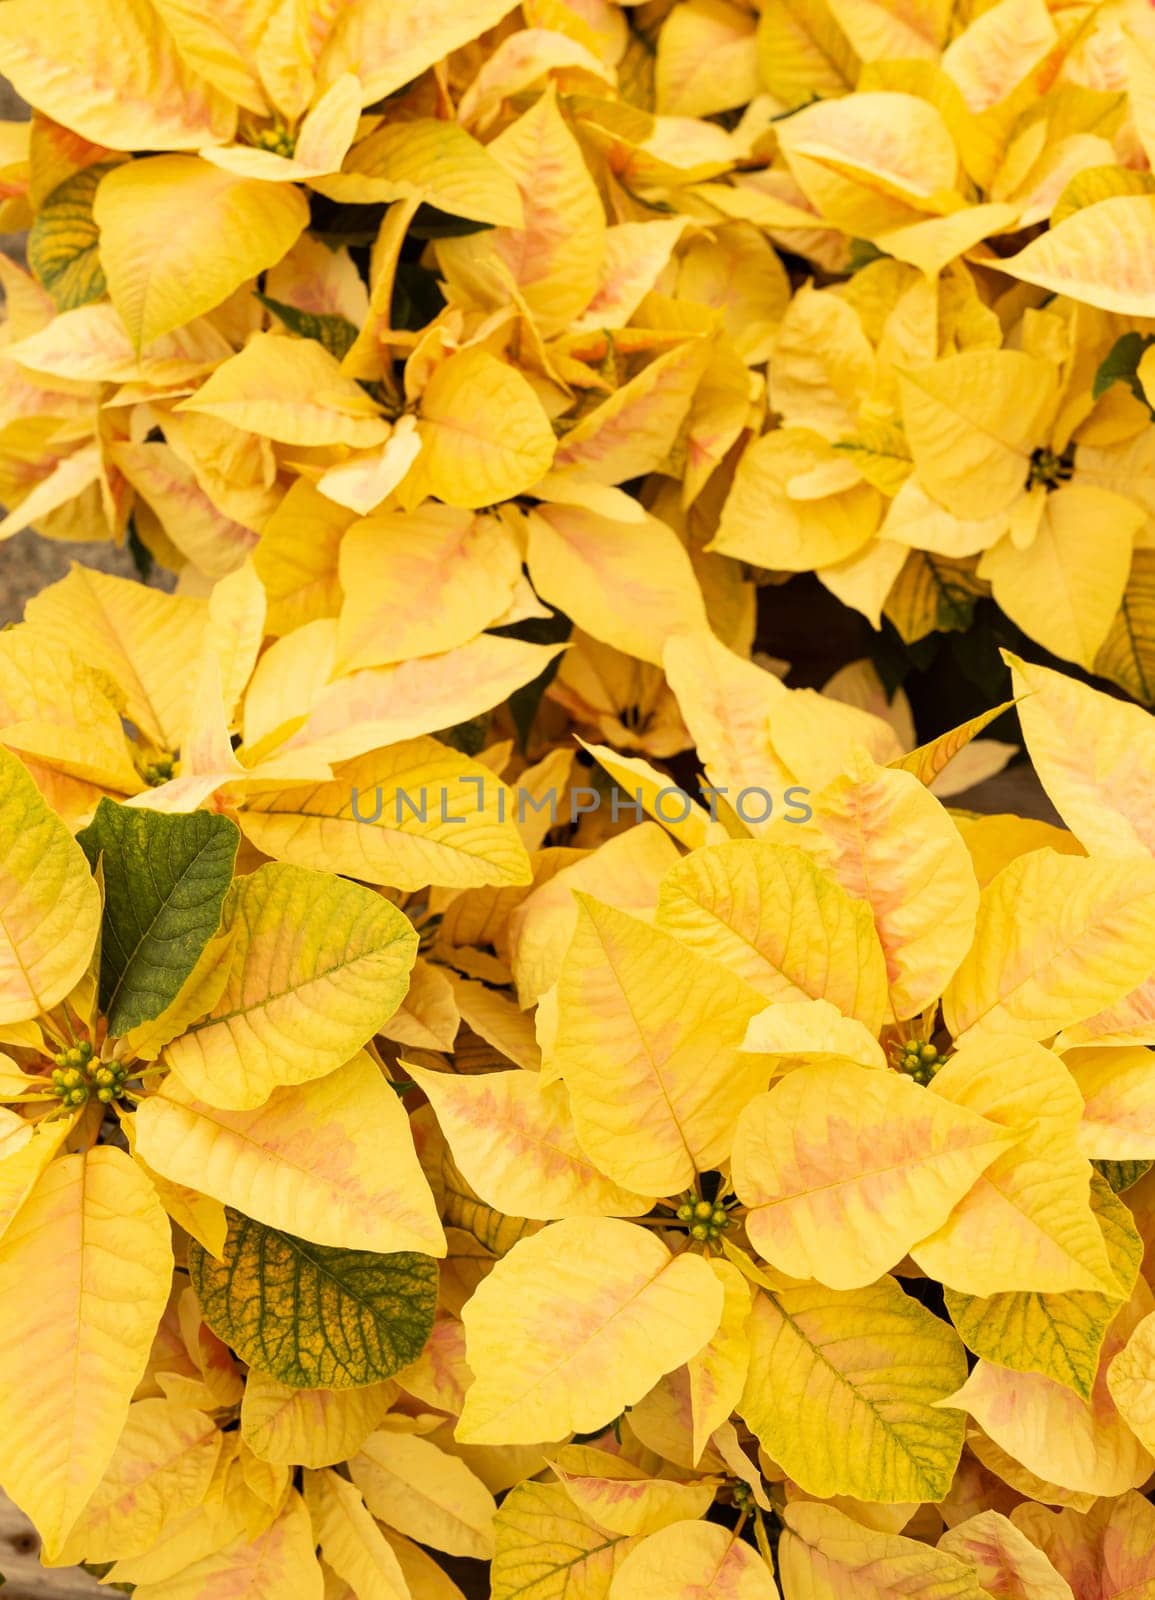 Many Yellow Pink Eckespoint Poinsettia Freedom Marble Plant, Potted Home Flower. Floral Backdrop. Christmas Eve Plant. Vertical Plane Xmas.